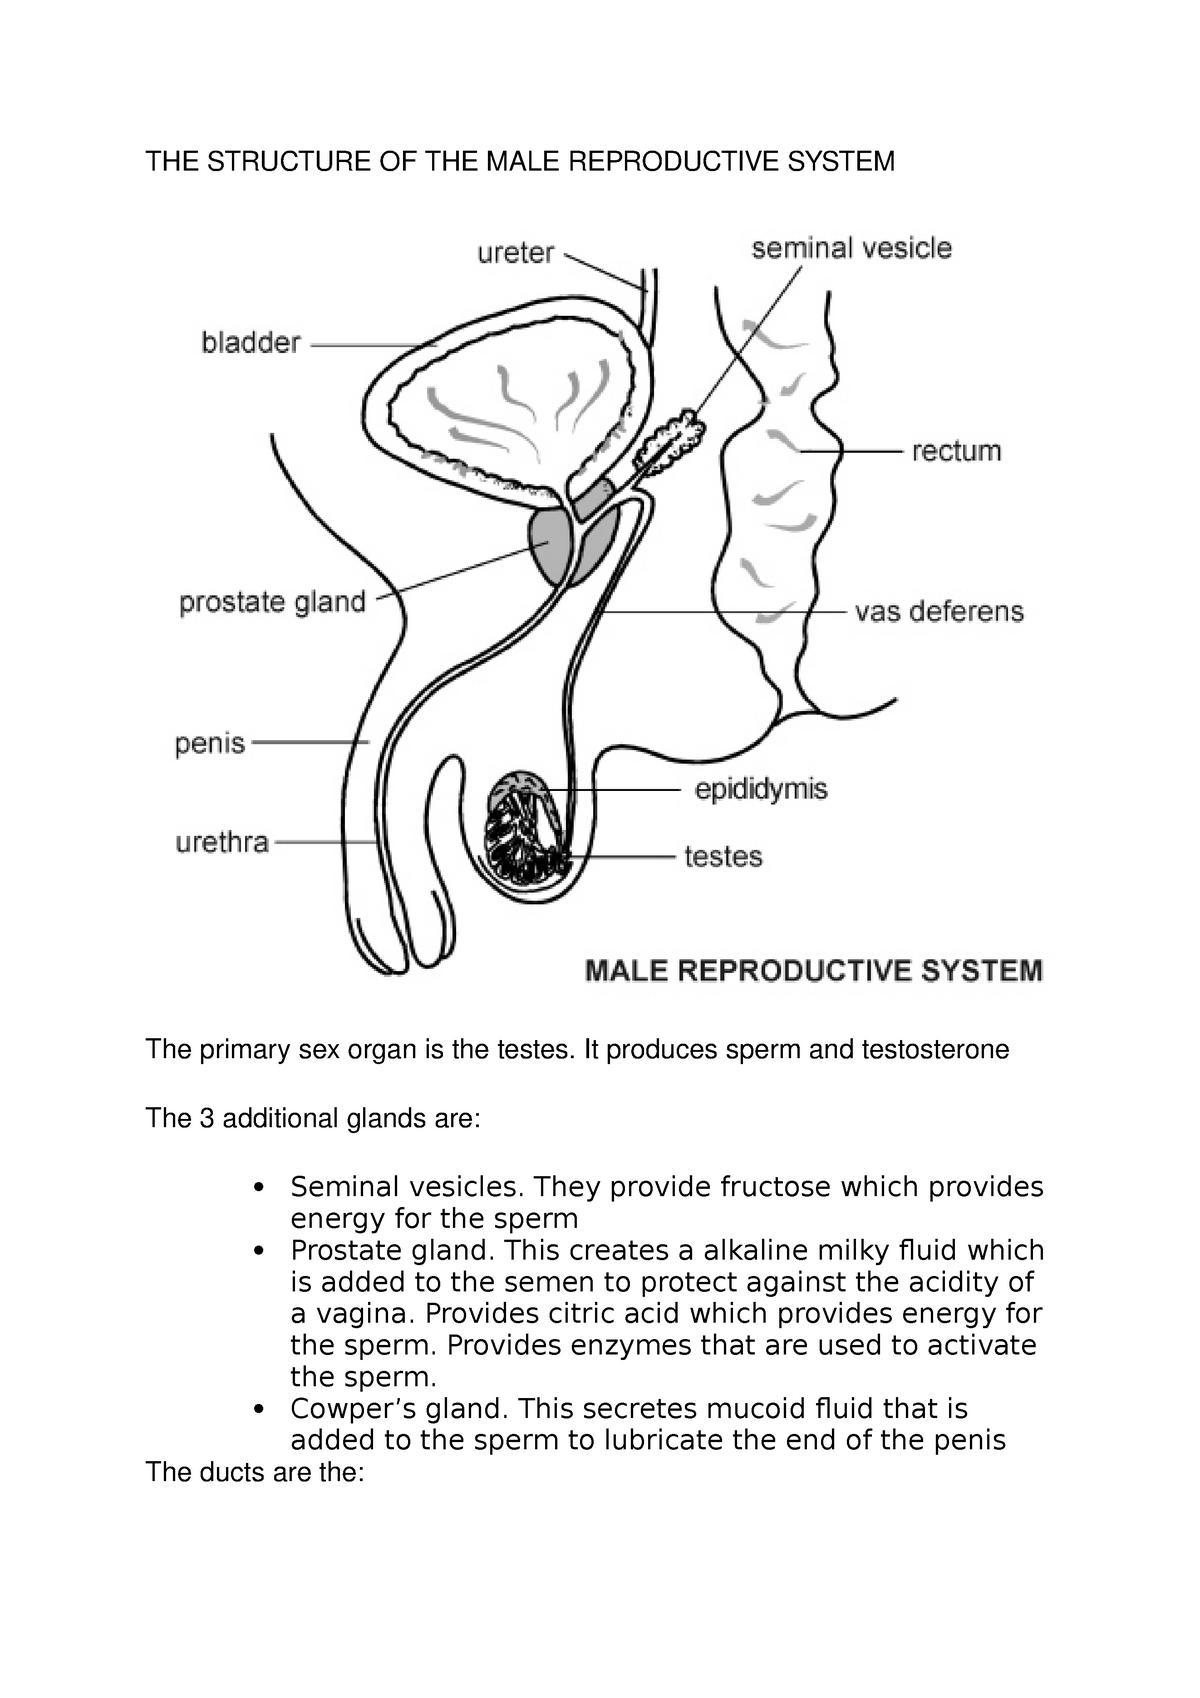 Grade Ieb Life Sciences Notes Reproductive Systems The Structure Of The Male Reproductive